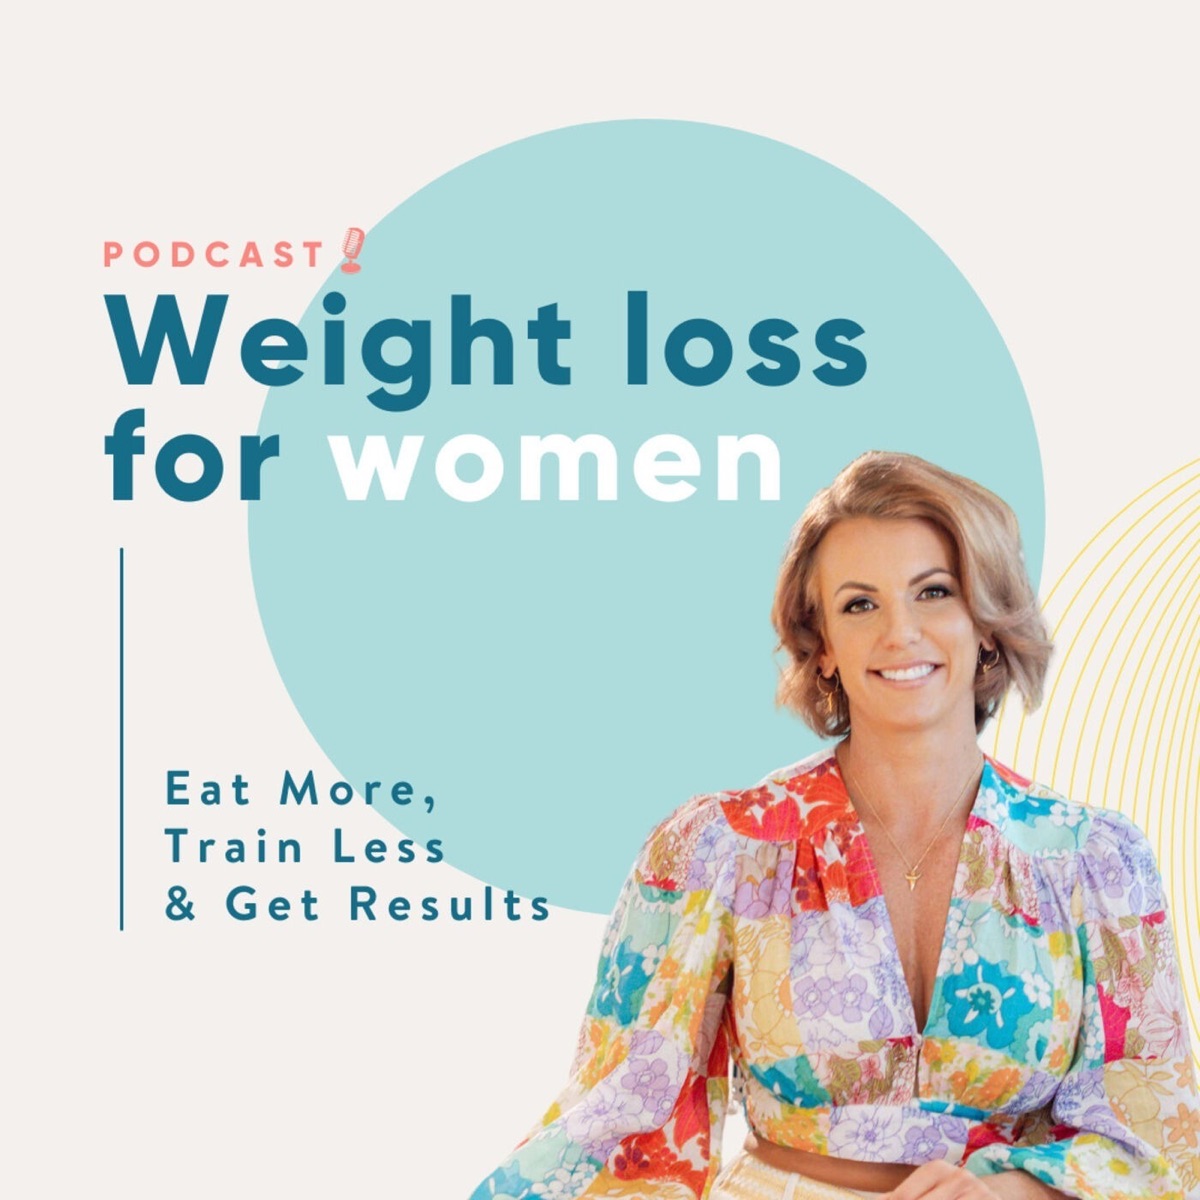 Weight Loss For Women: eat more, train less, get results